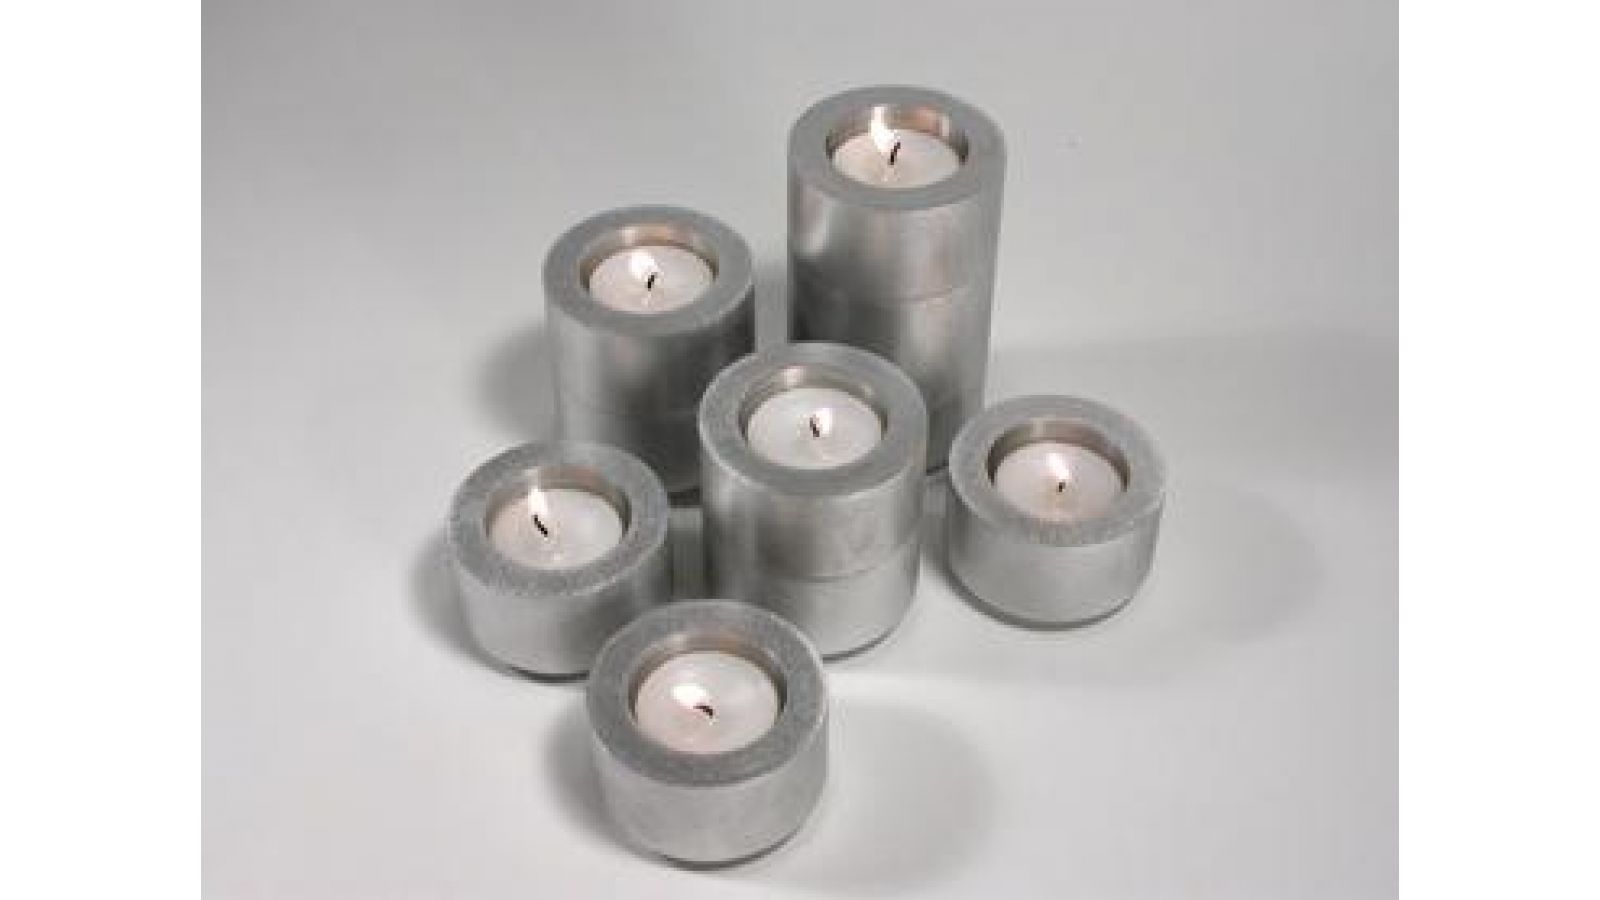 Shine 4-Stackable Menorah Candle and Tealight Set